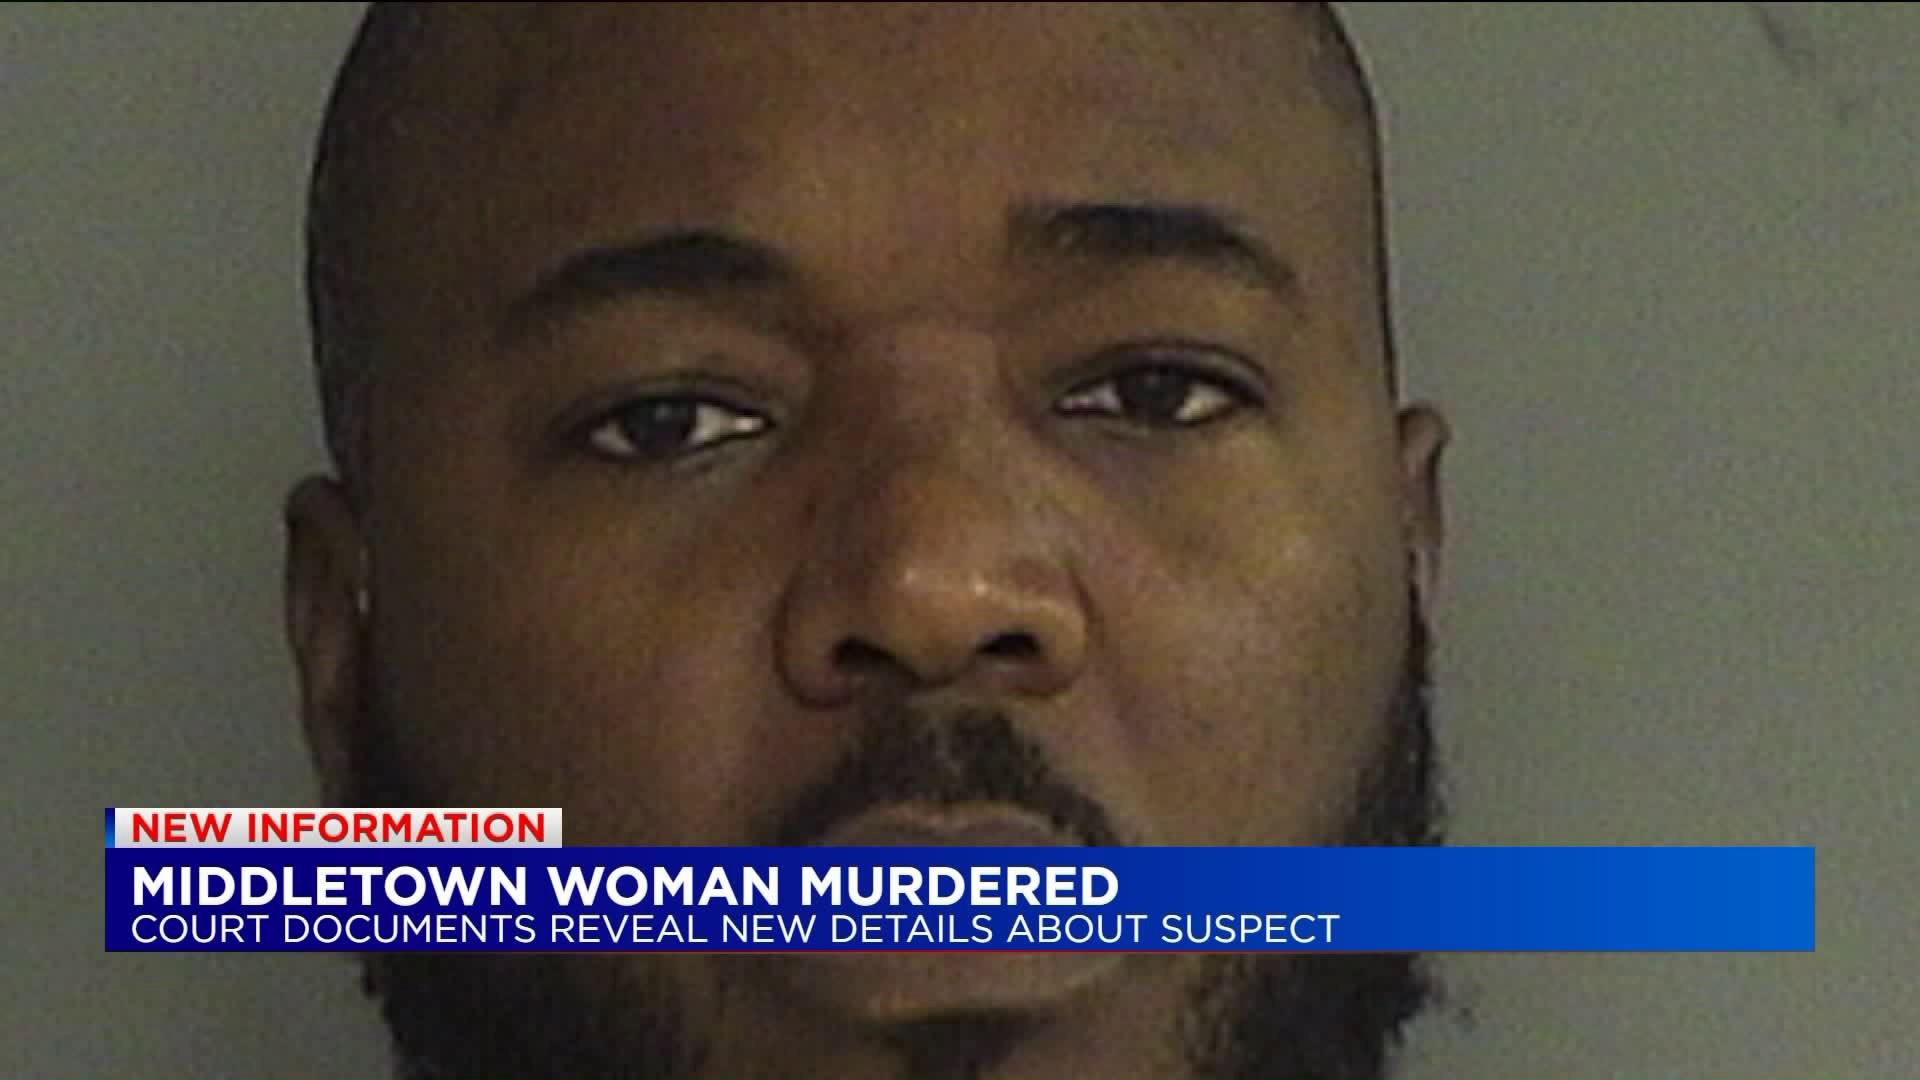 Middletown woman murdered